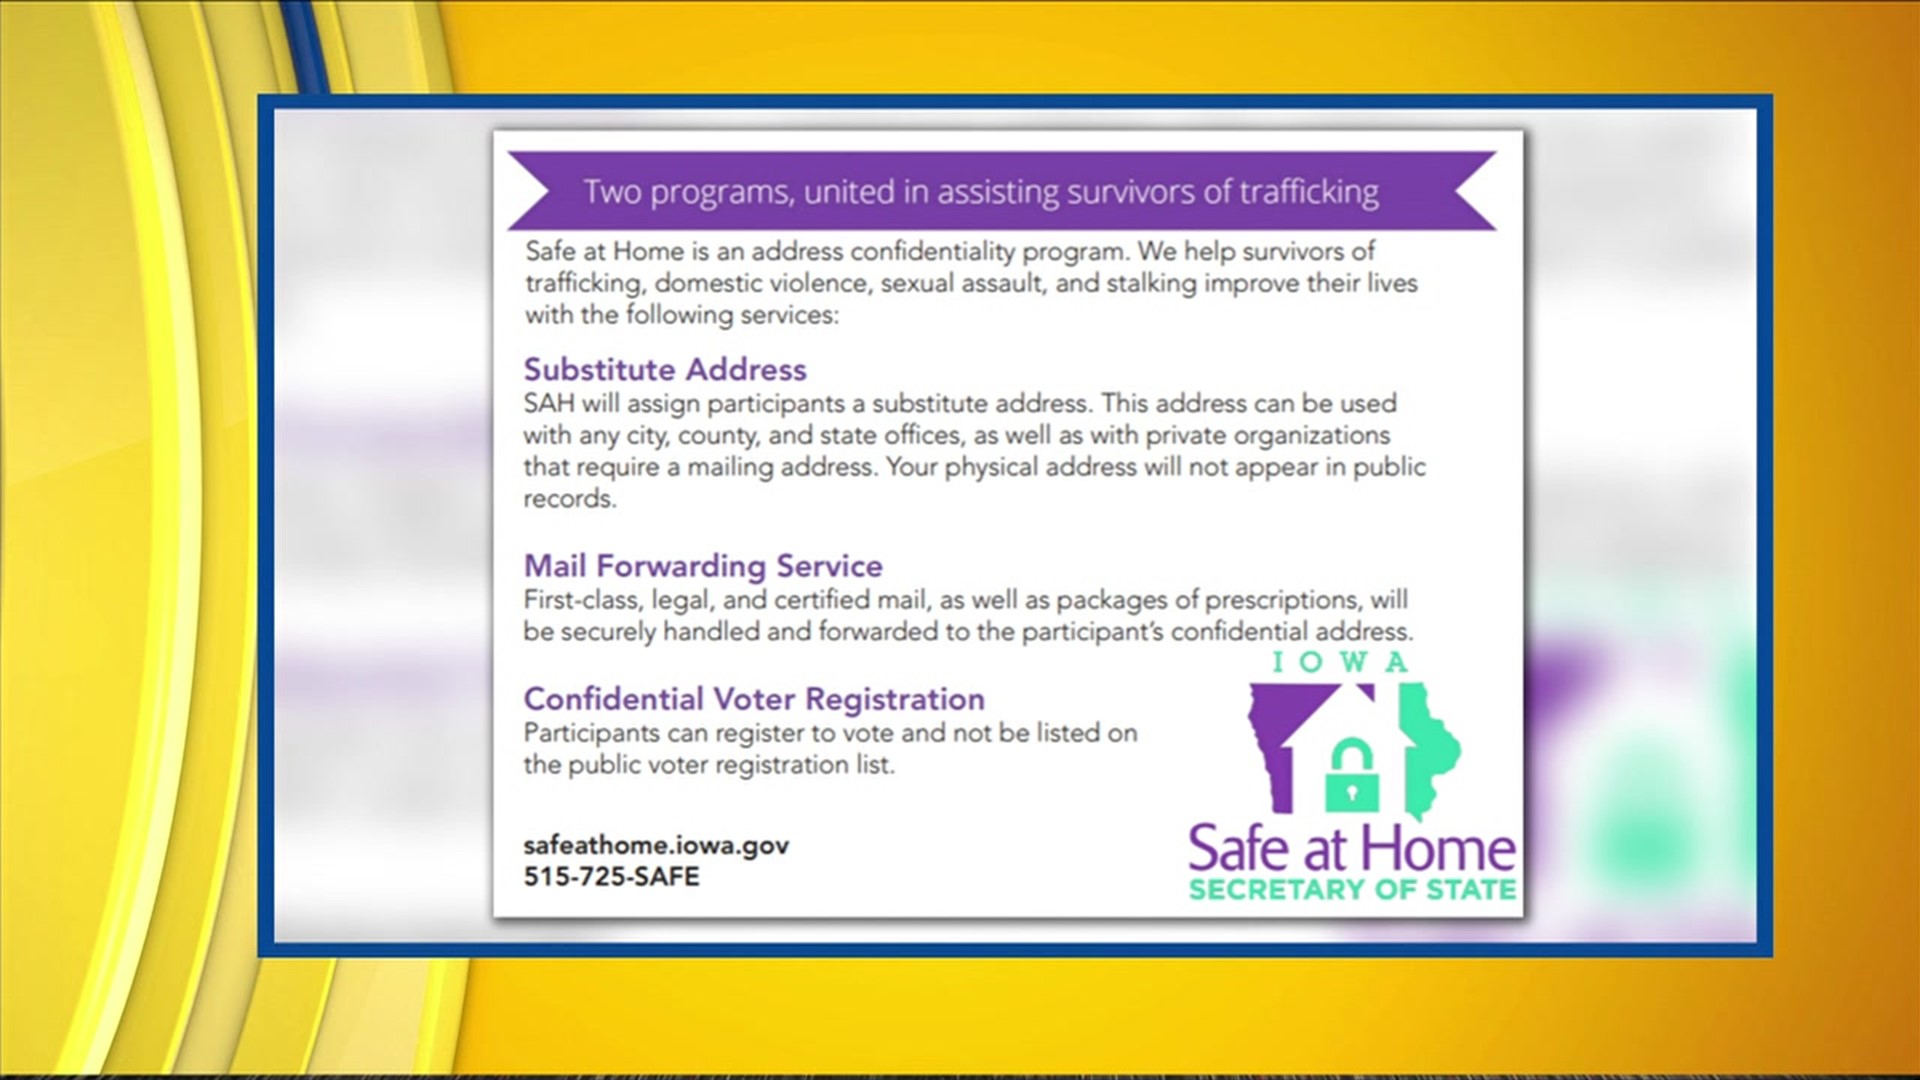 Safe at Home, an address confidentiality program